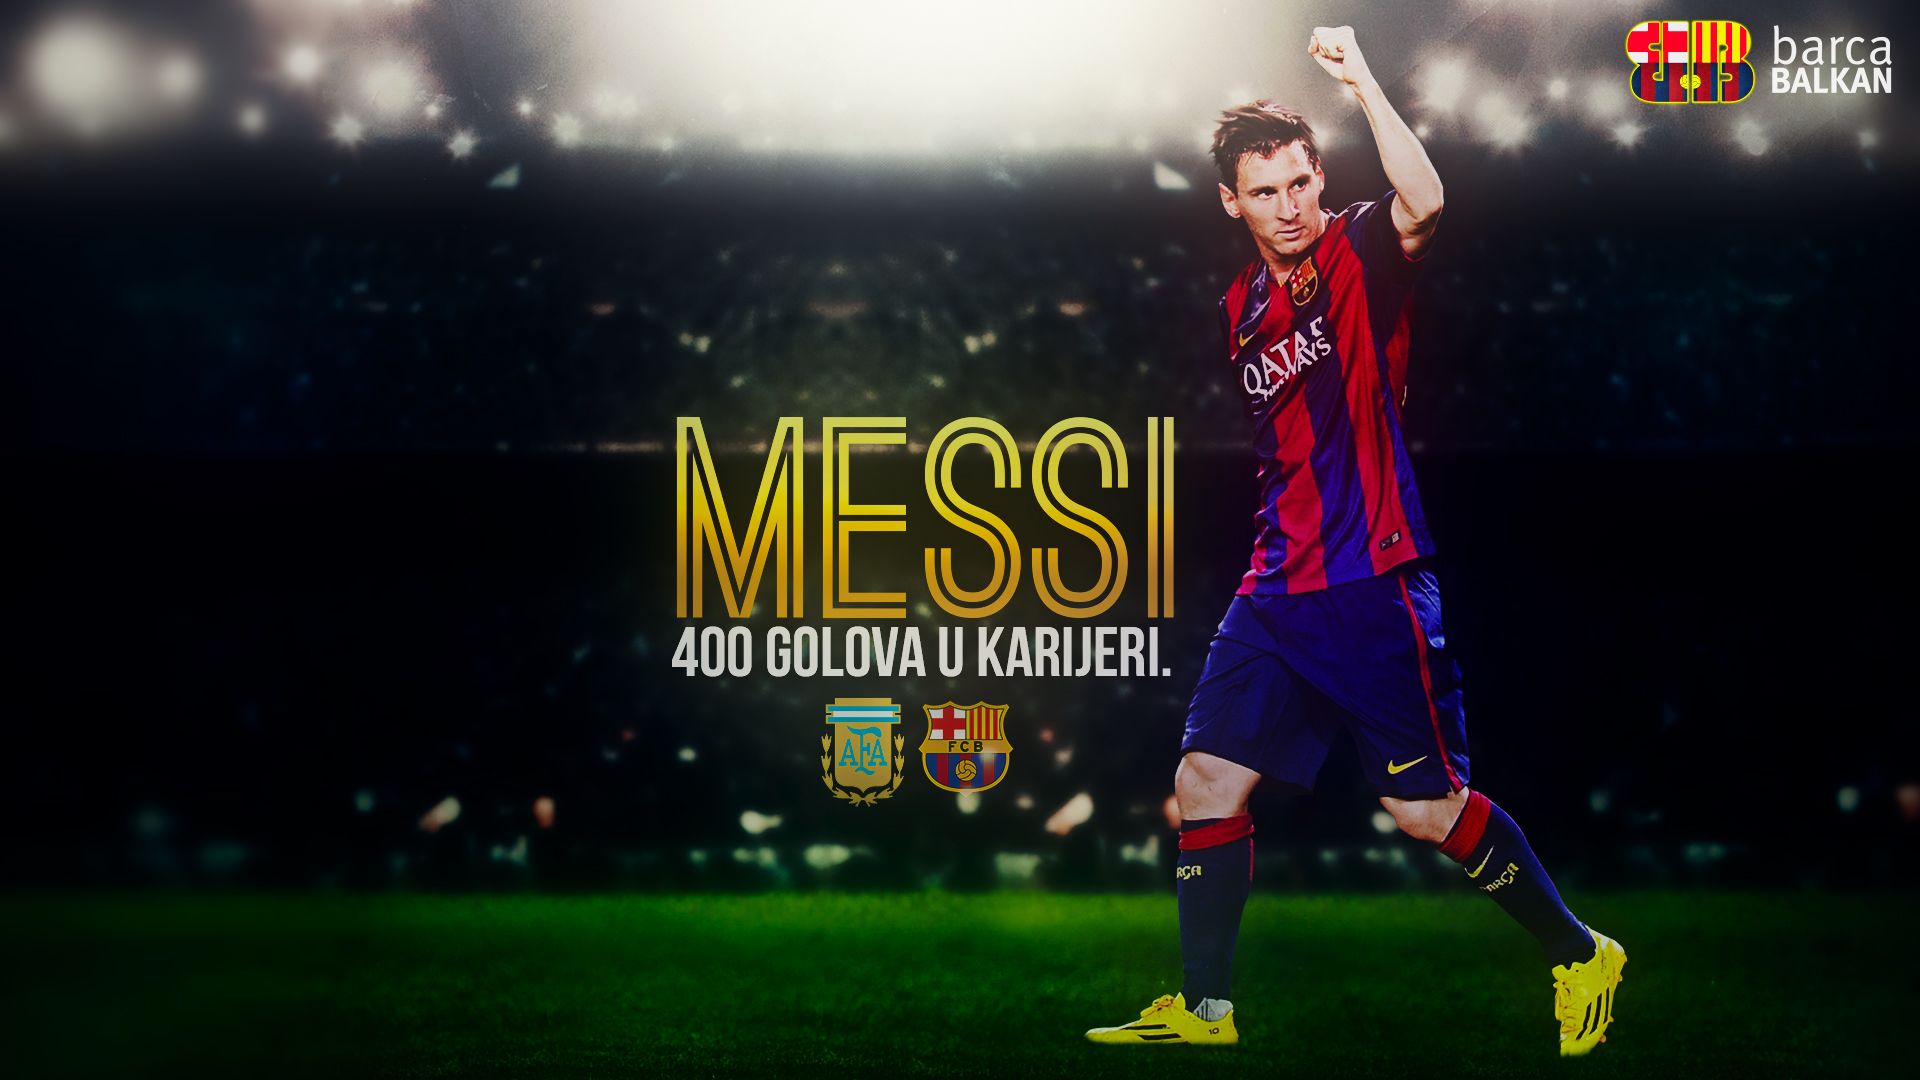 Lionel Andres Leo Messi M10 Wallpaper Full HD Free Download